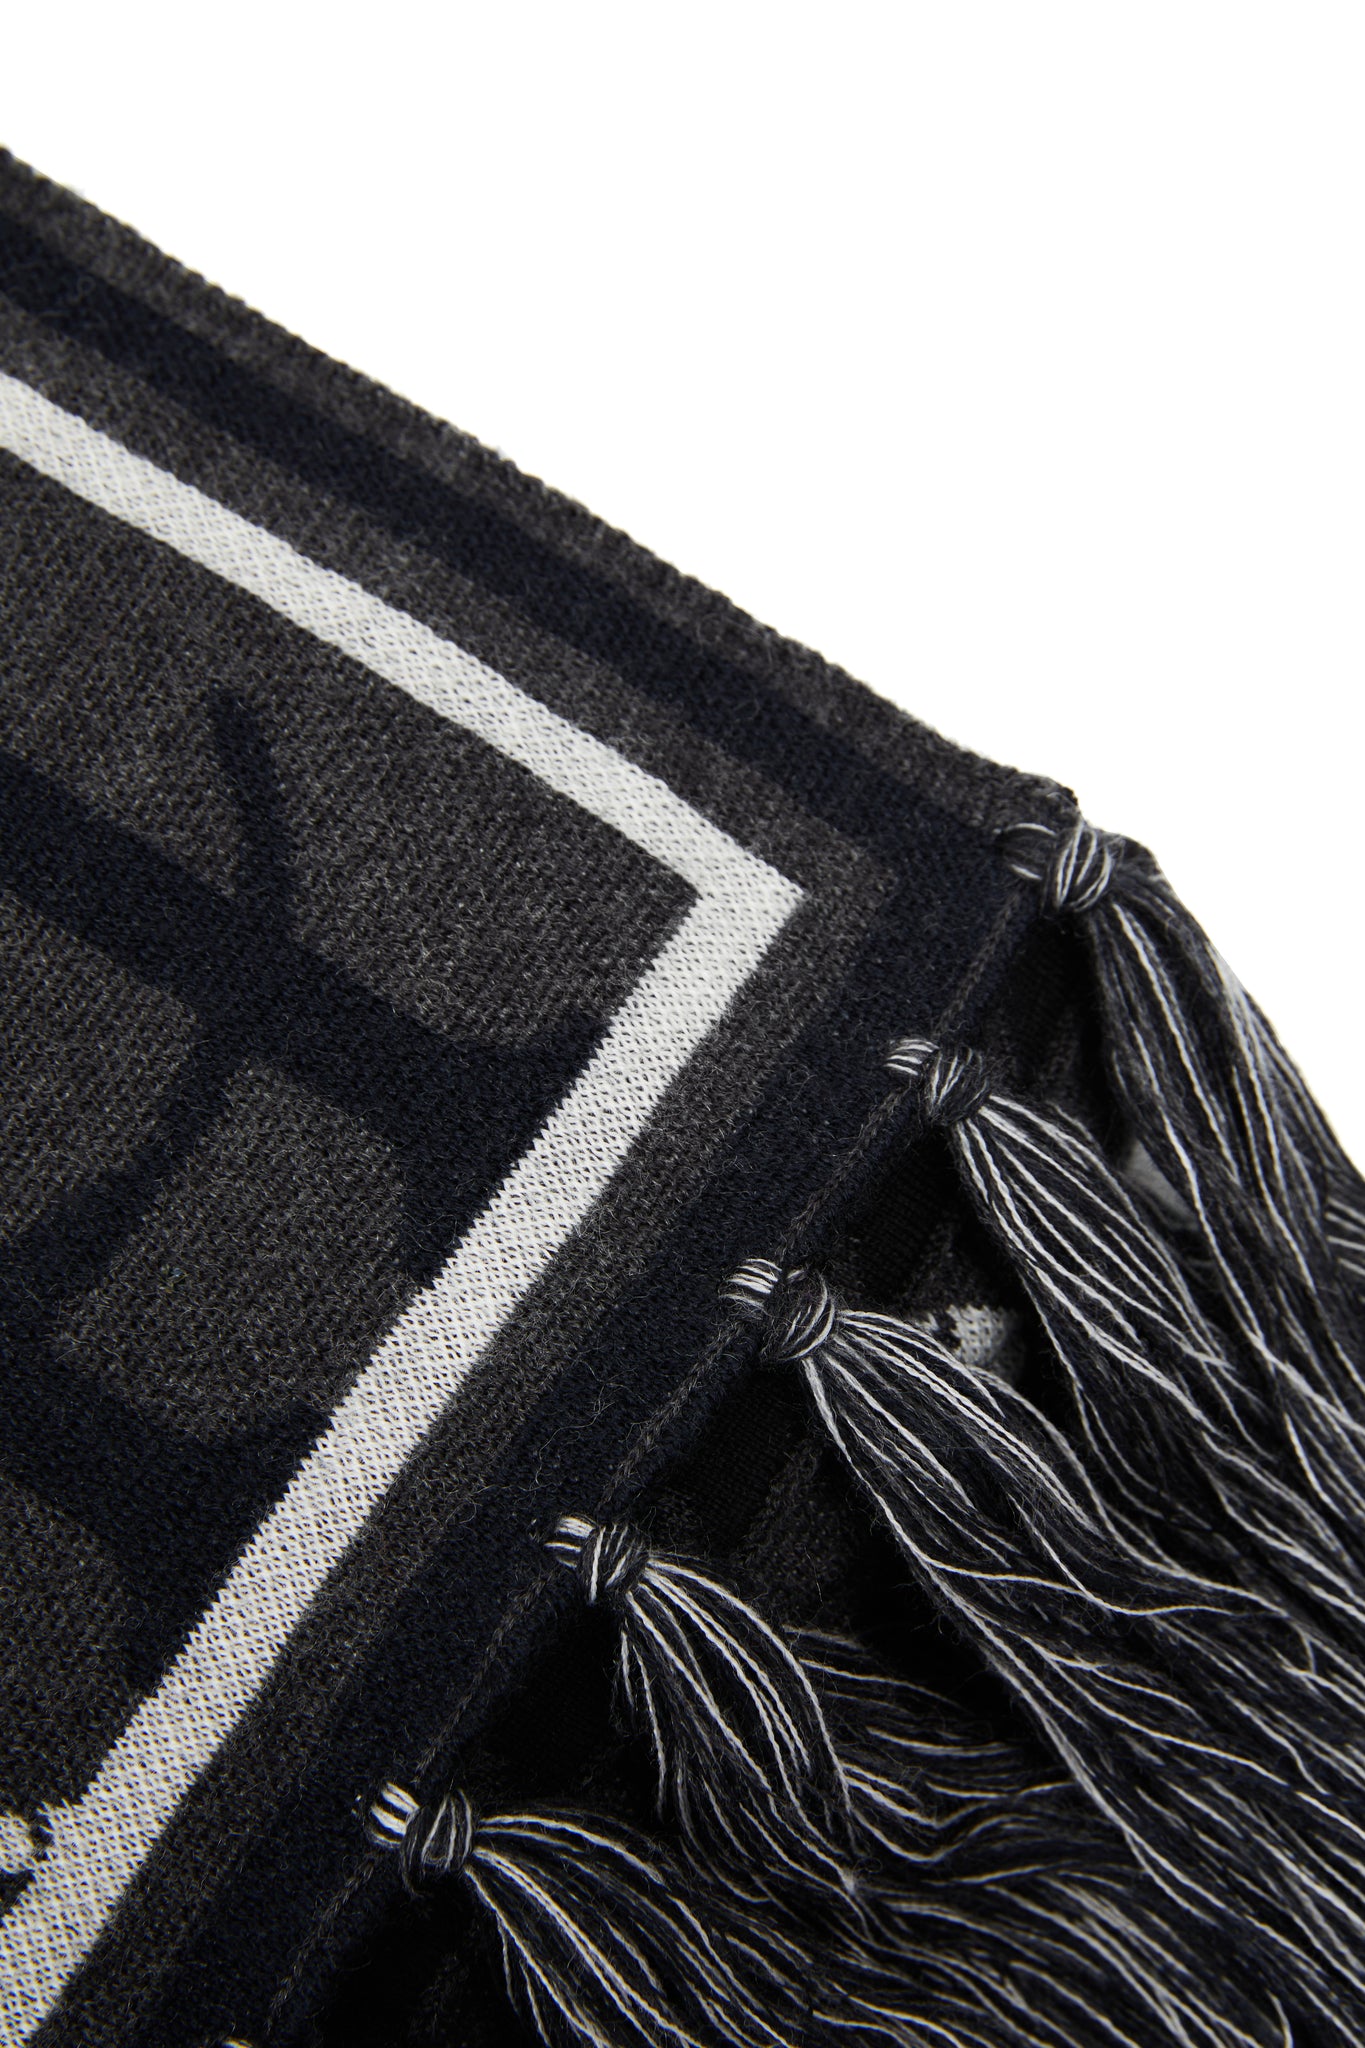 Reversible Monogram Scarf (Charcoal Houndstooth)